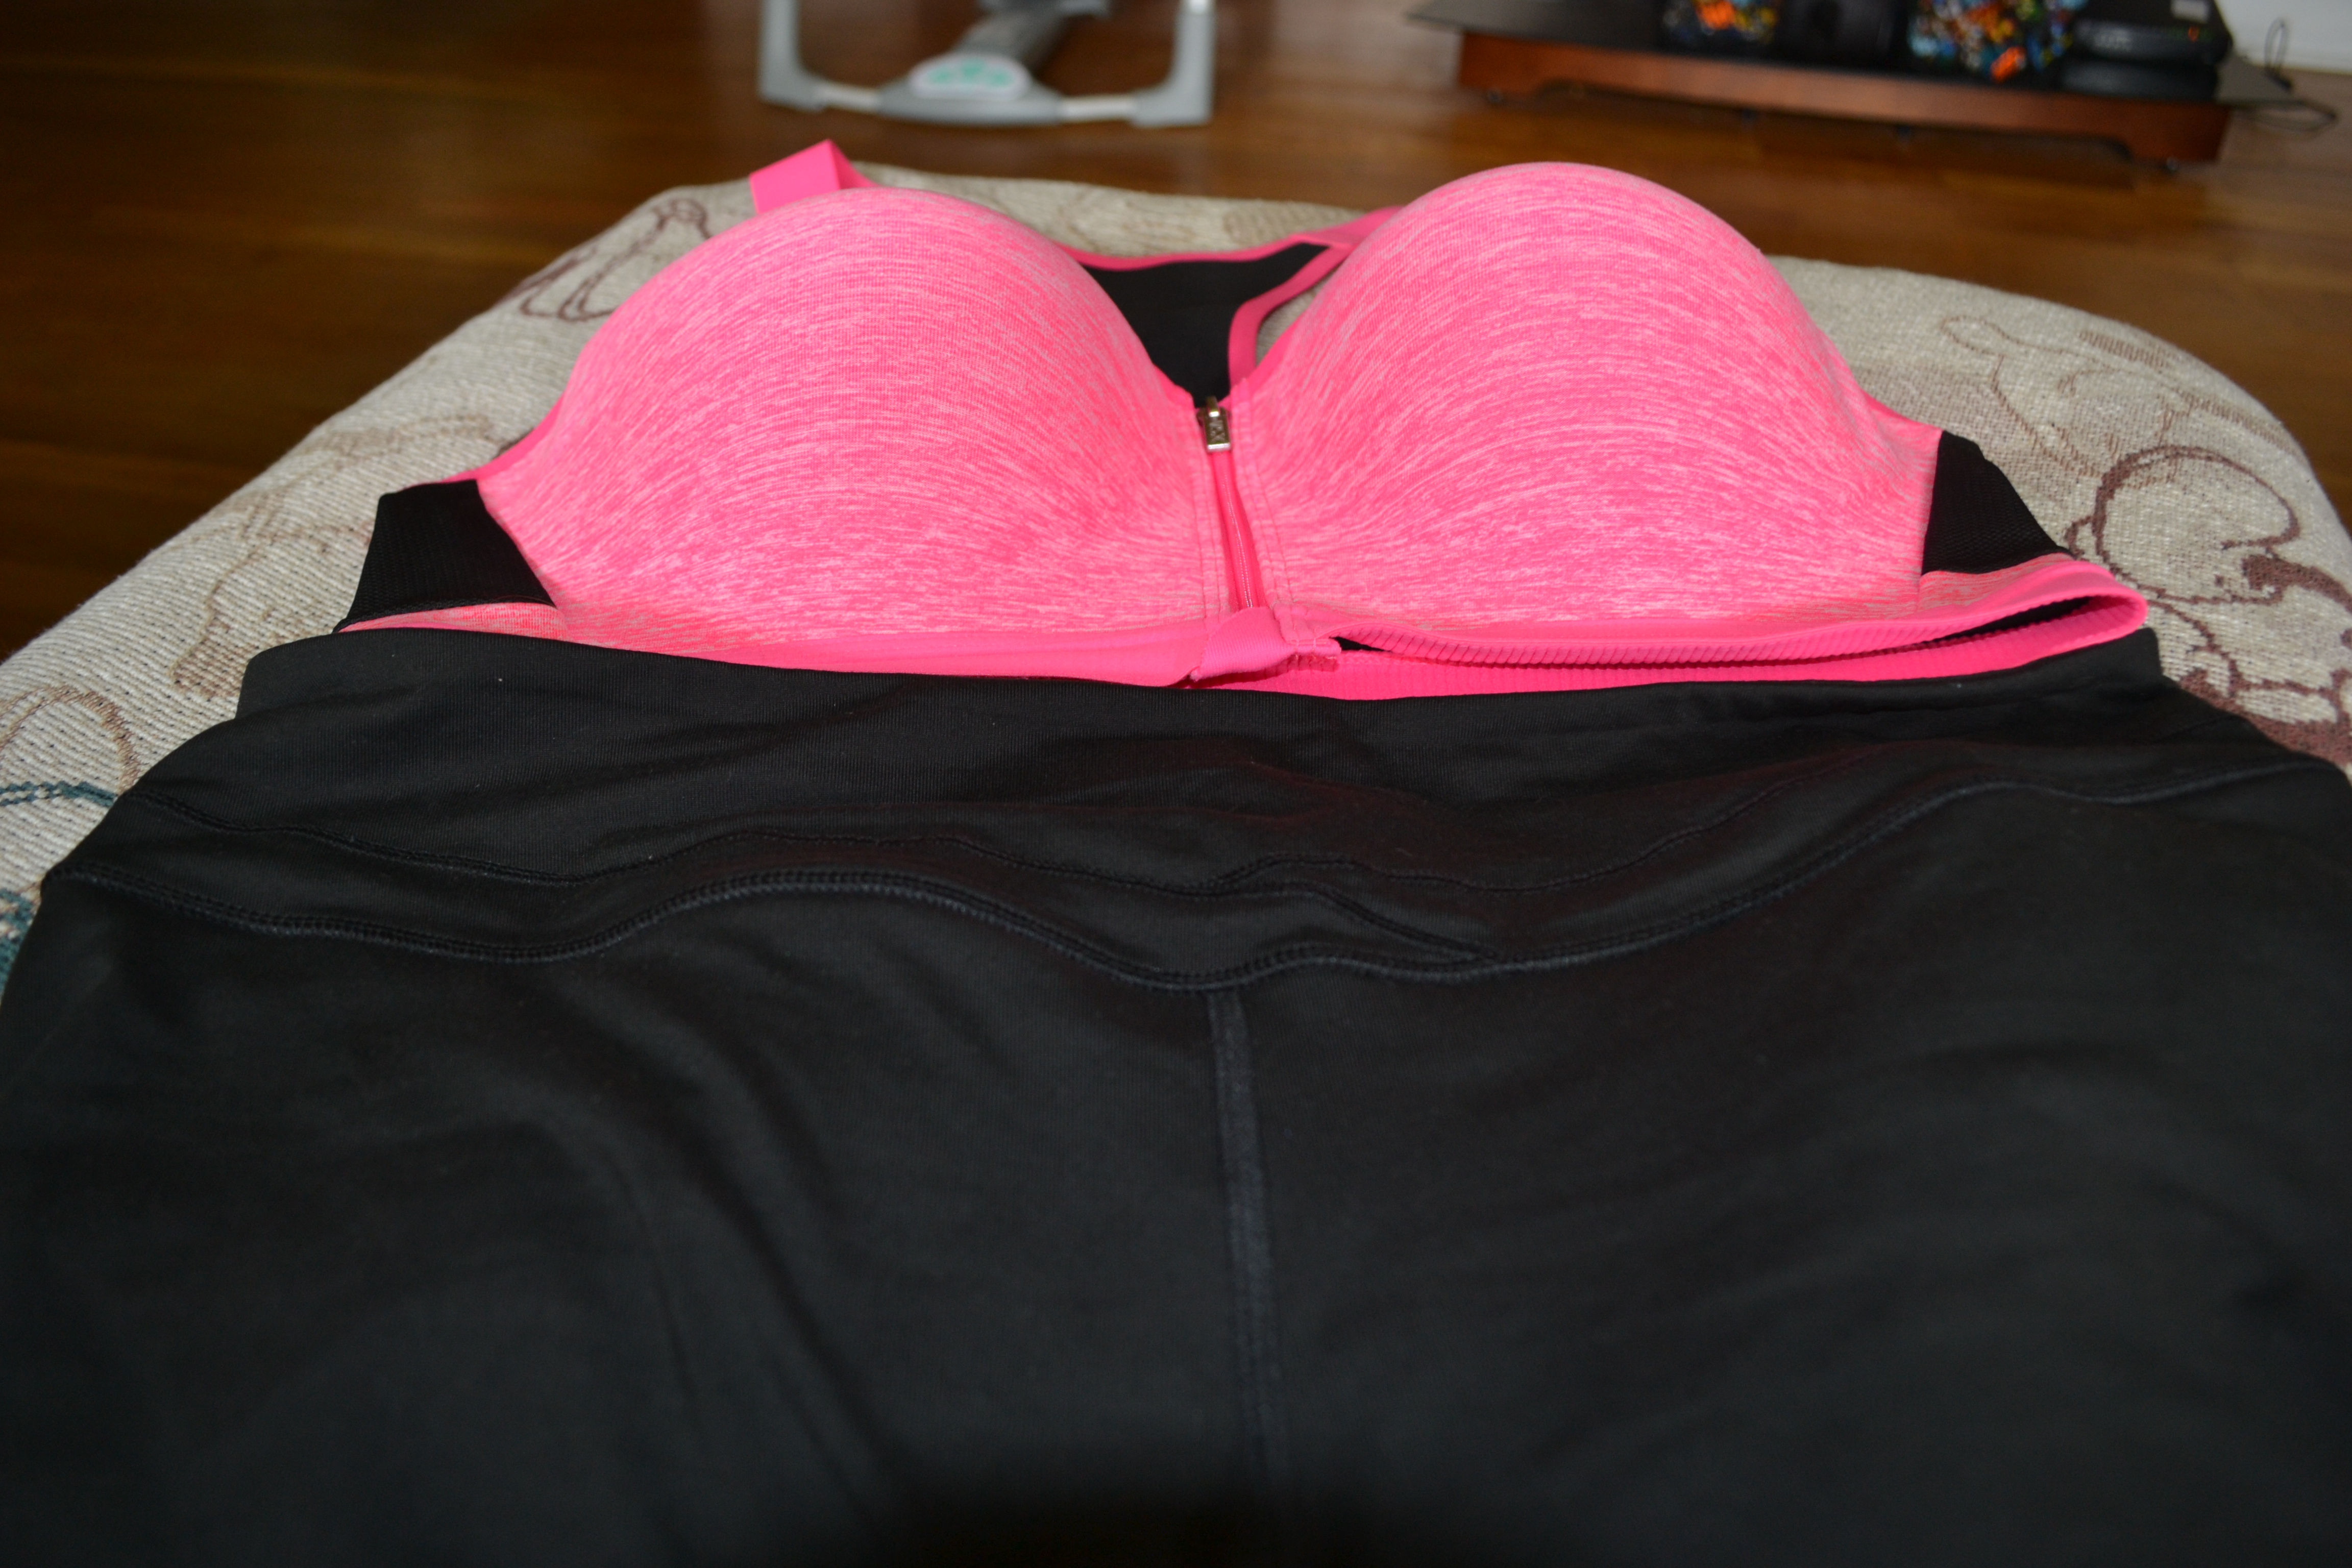 Victoria's Secret Sports Bra & Pants Review – Greater Fitness